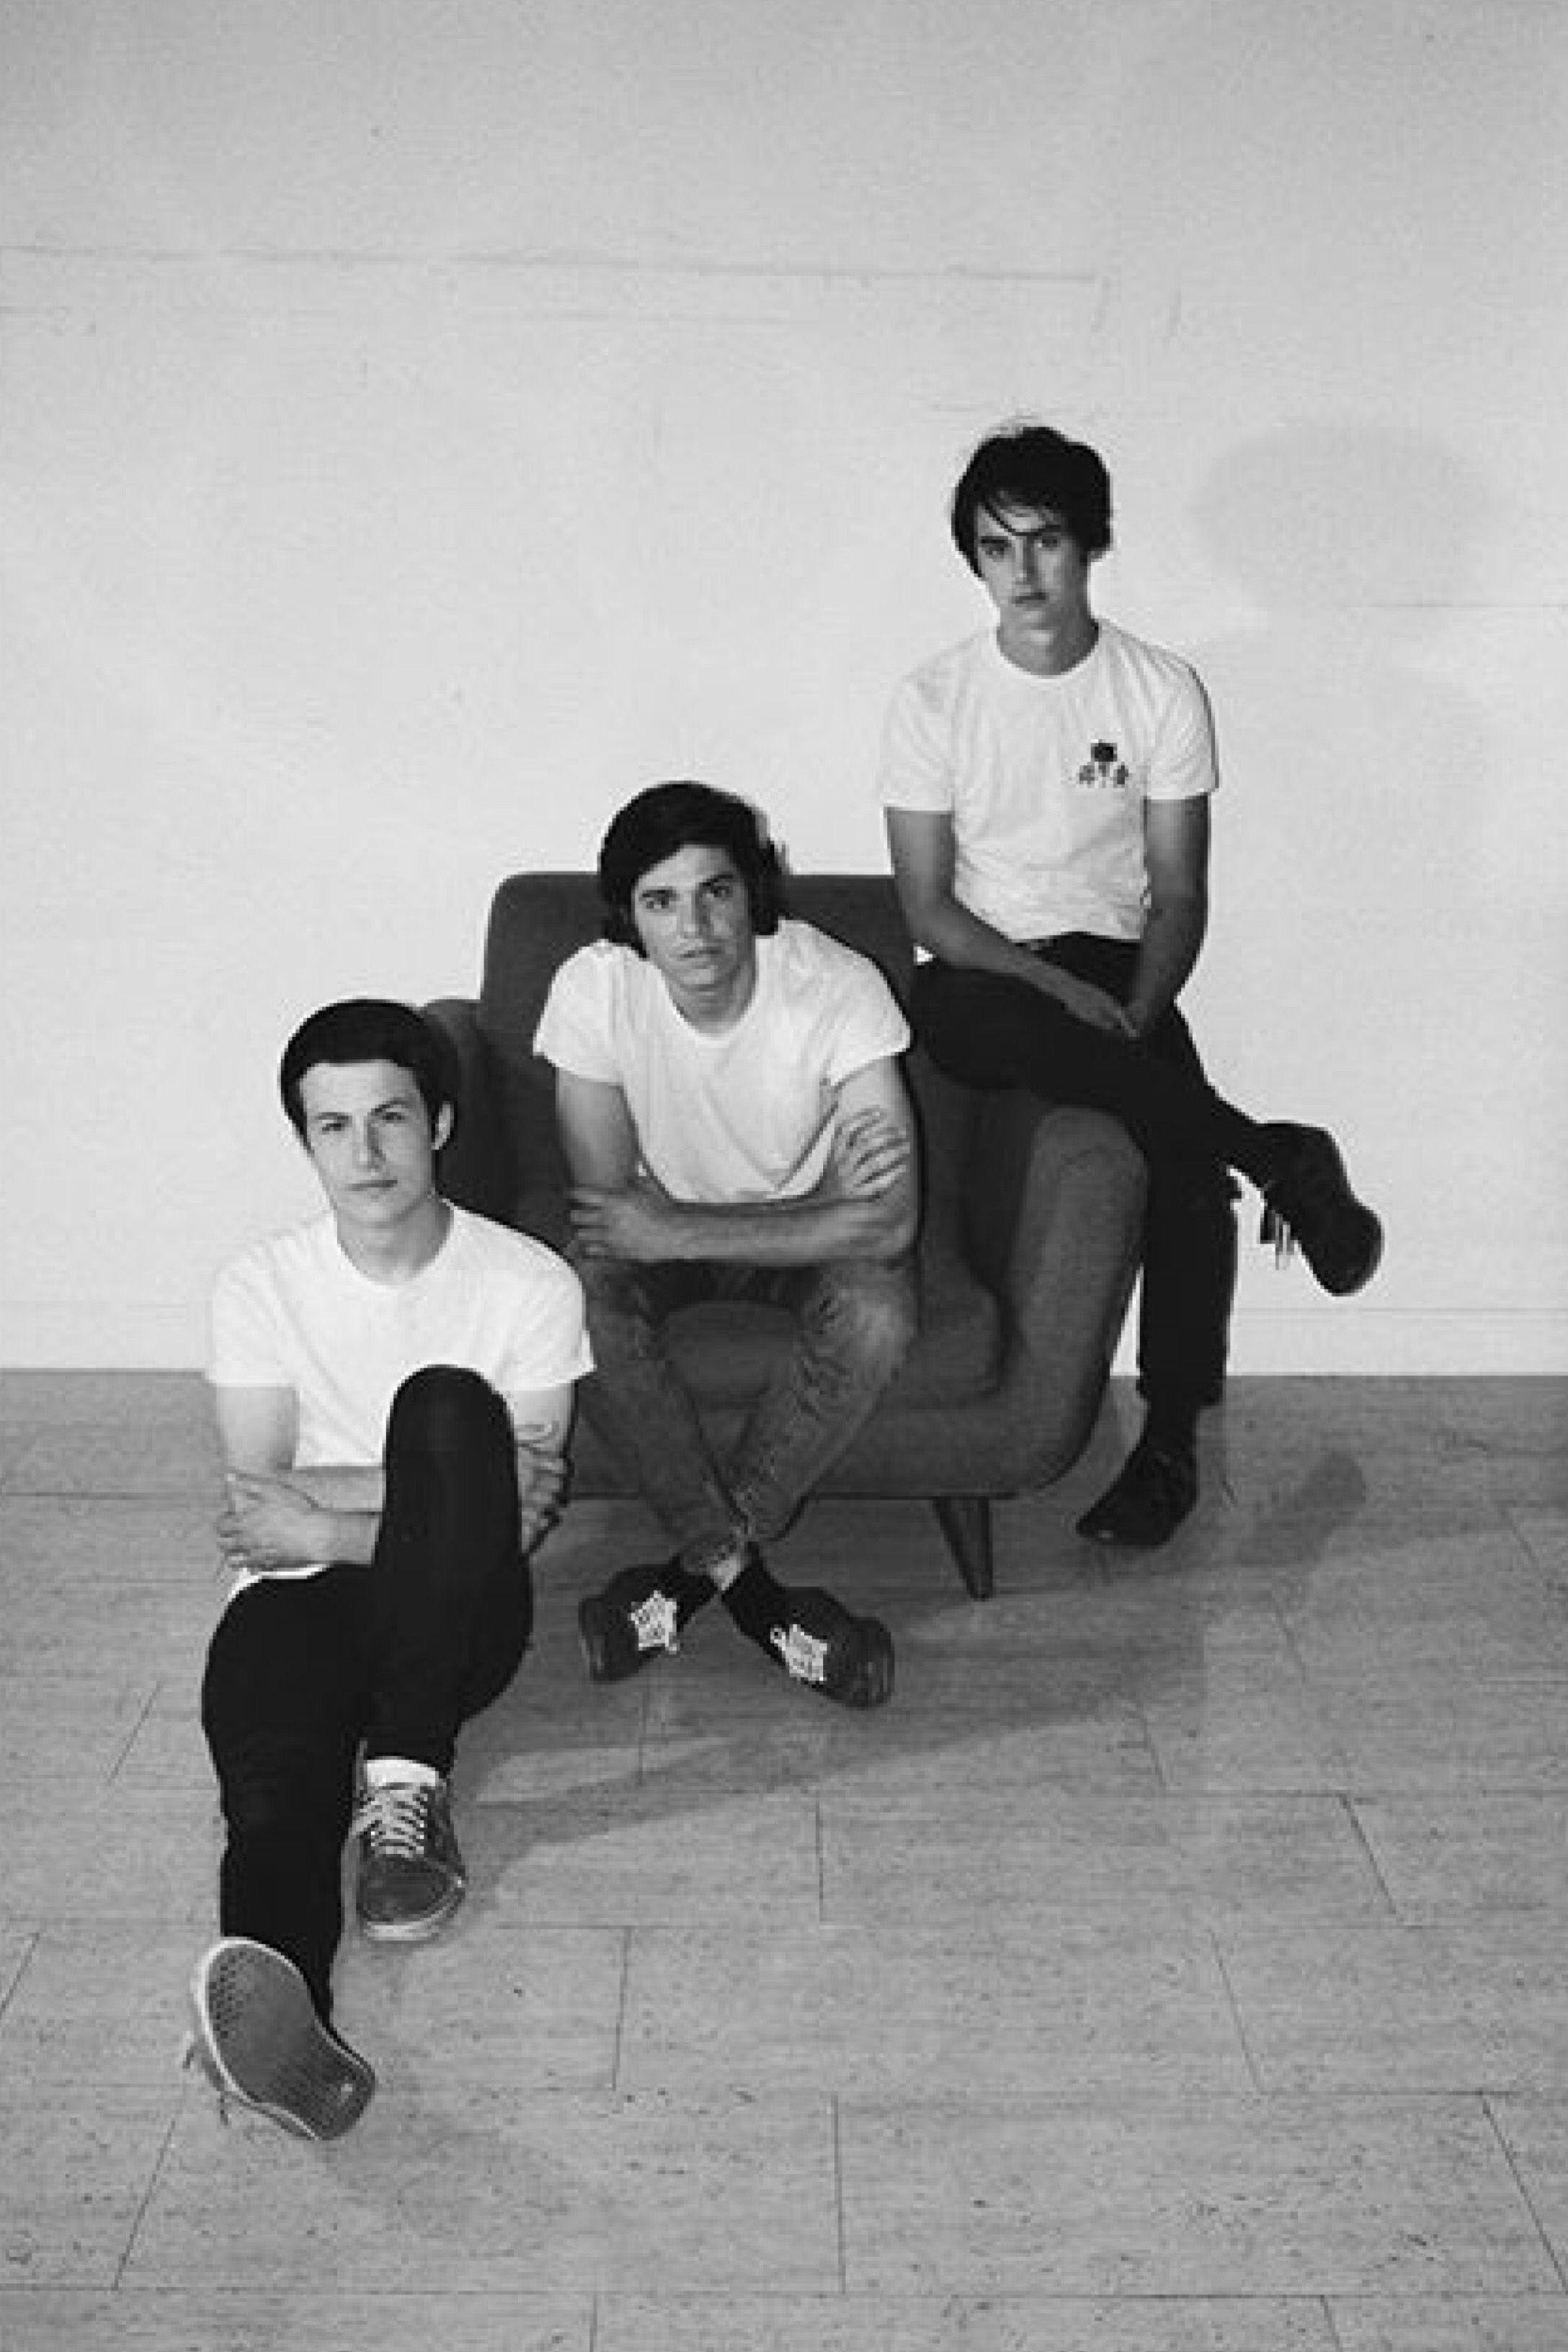 Wallows. dyldo. Music bands, Indie music